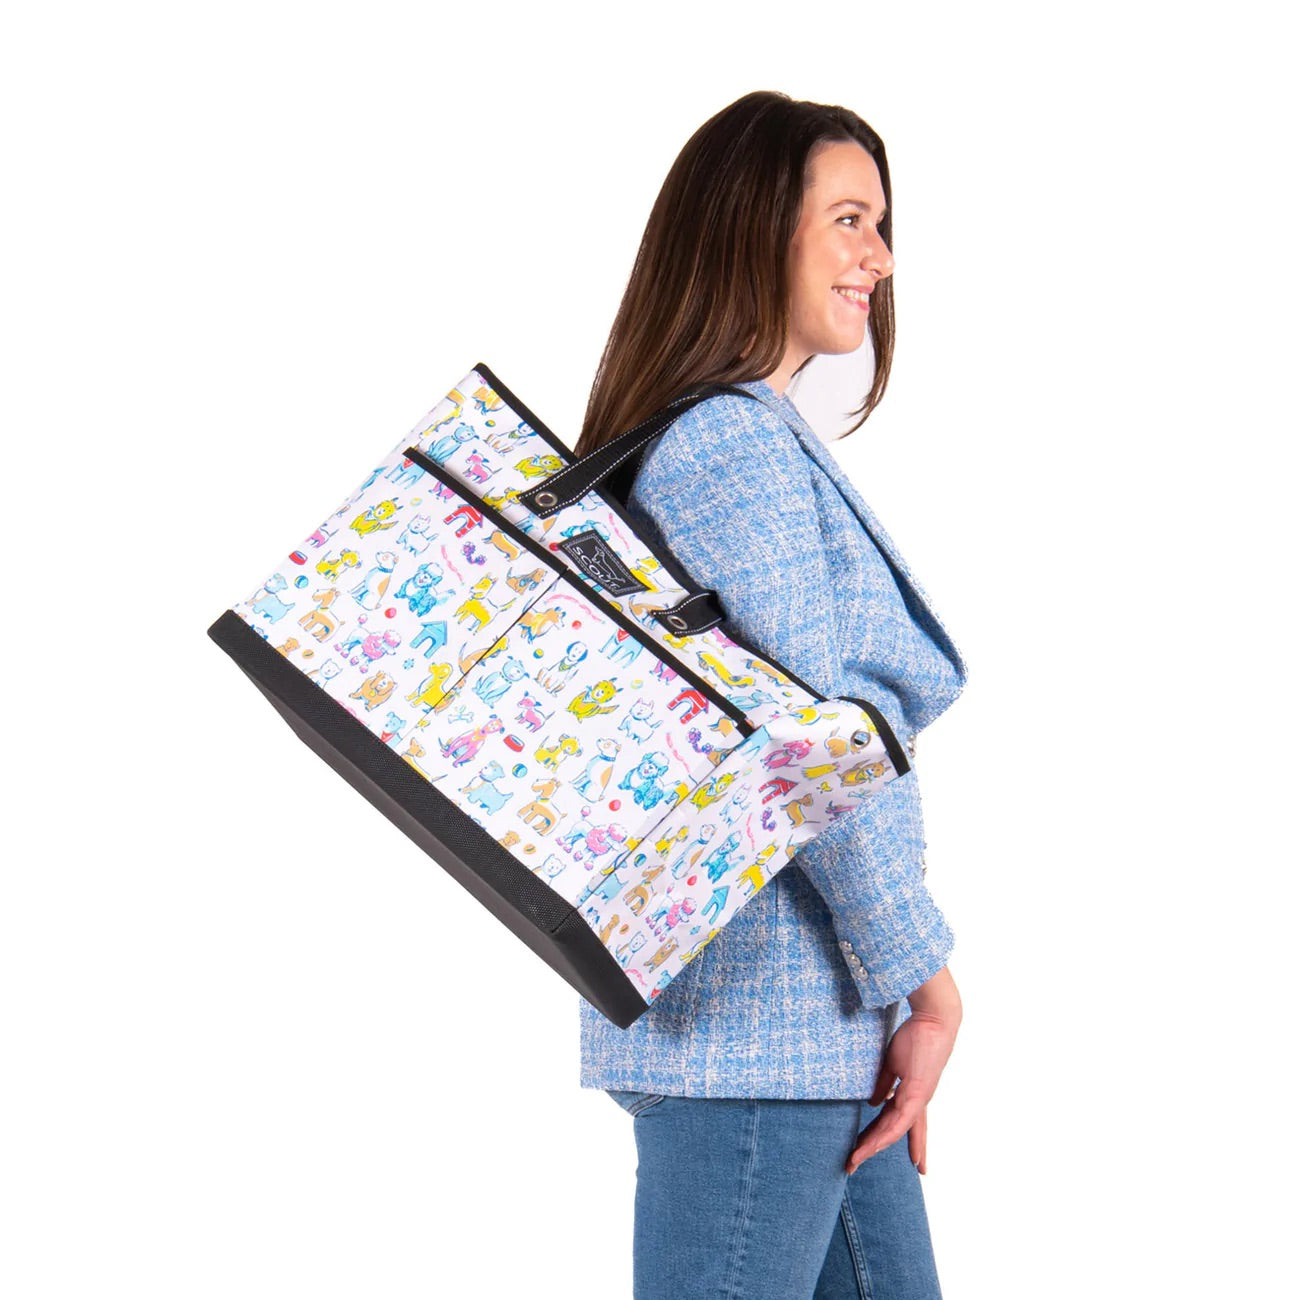 THE BJ BAG POCKET TOTE "Best in Show" Print